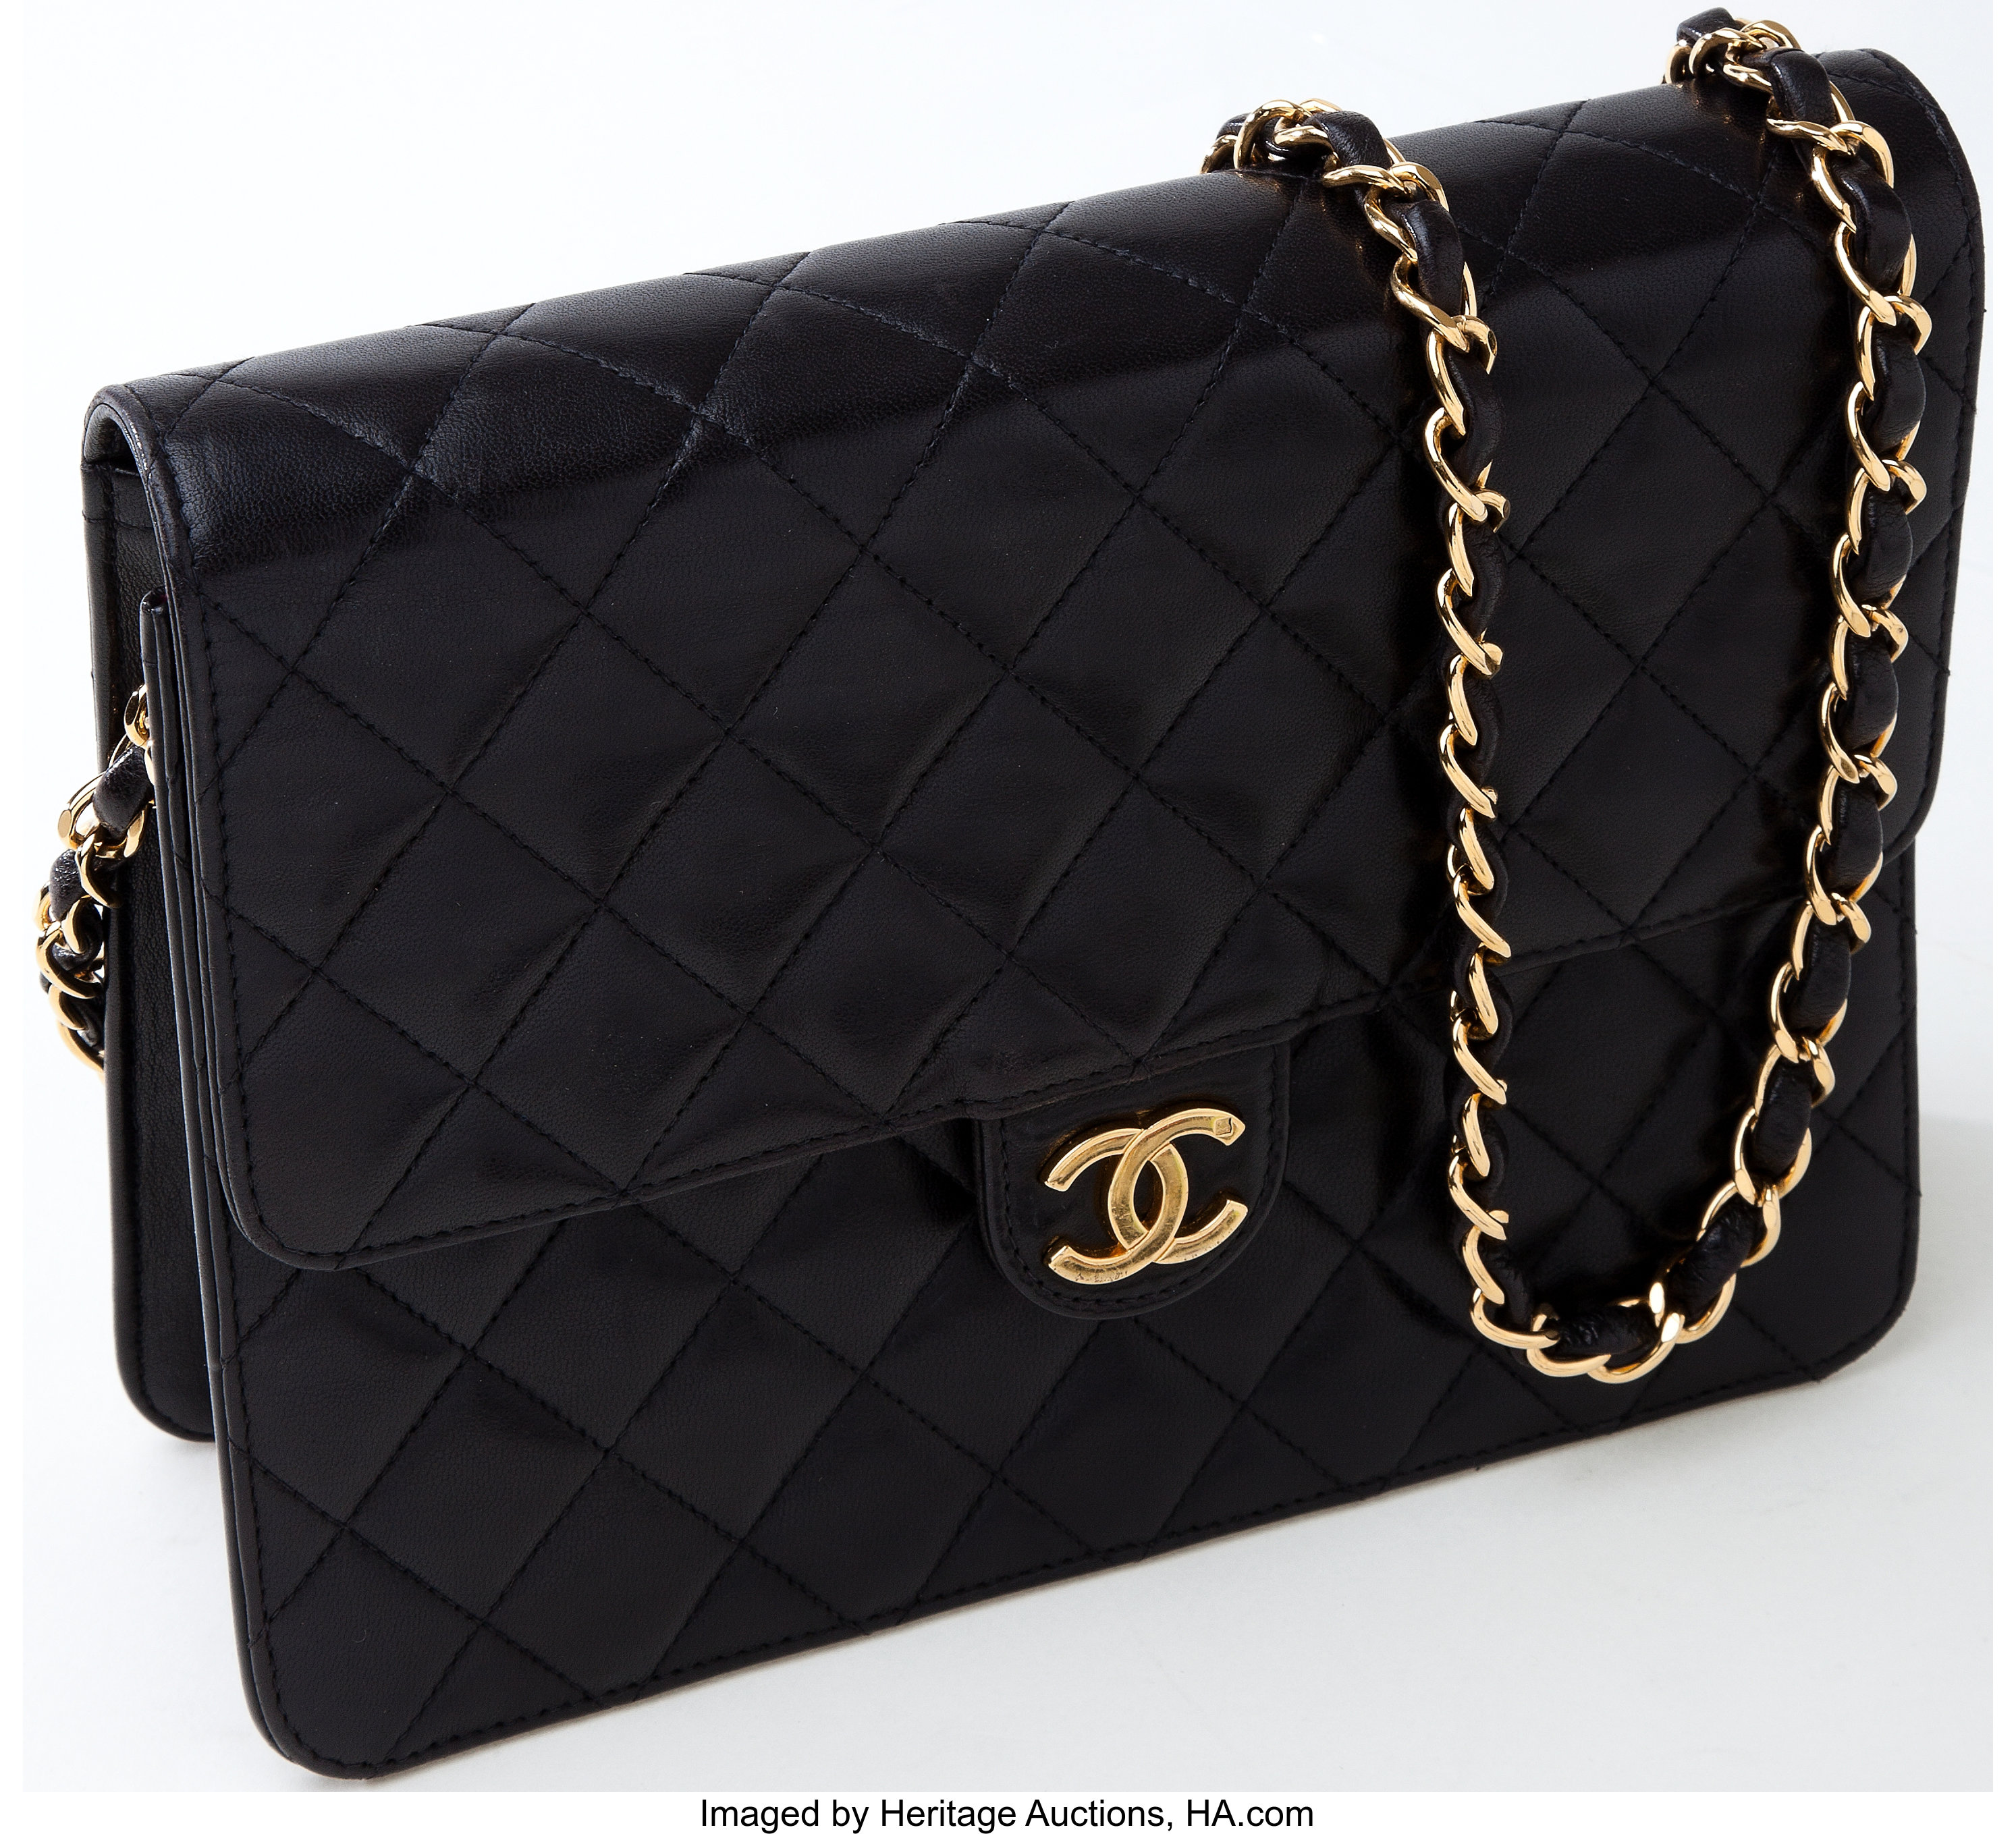 Heritage Vintage: Chanel Black Quilted Lambskin Leather, Lot #78008, Heritage Auctions